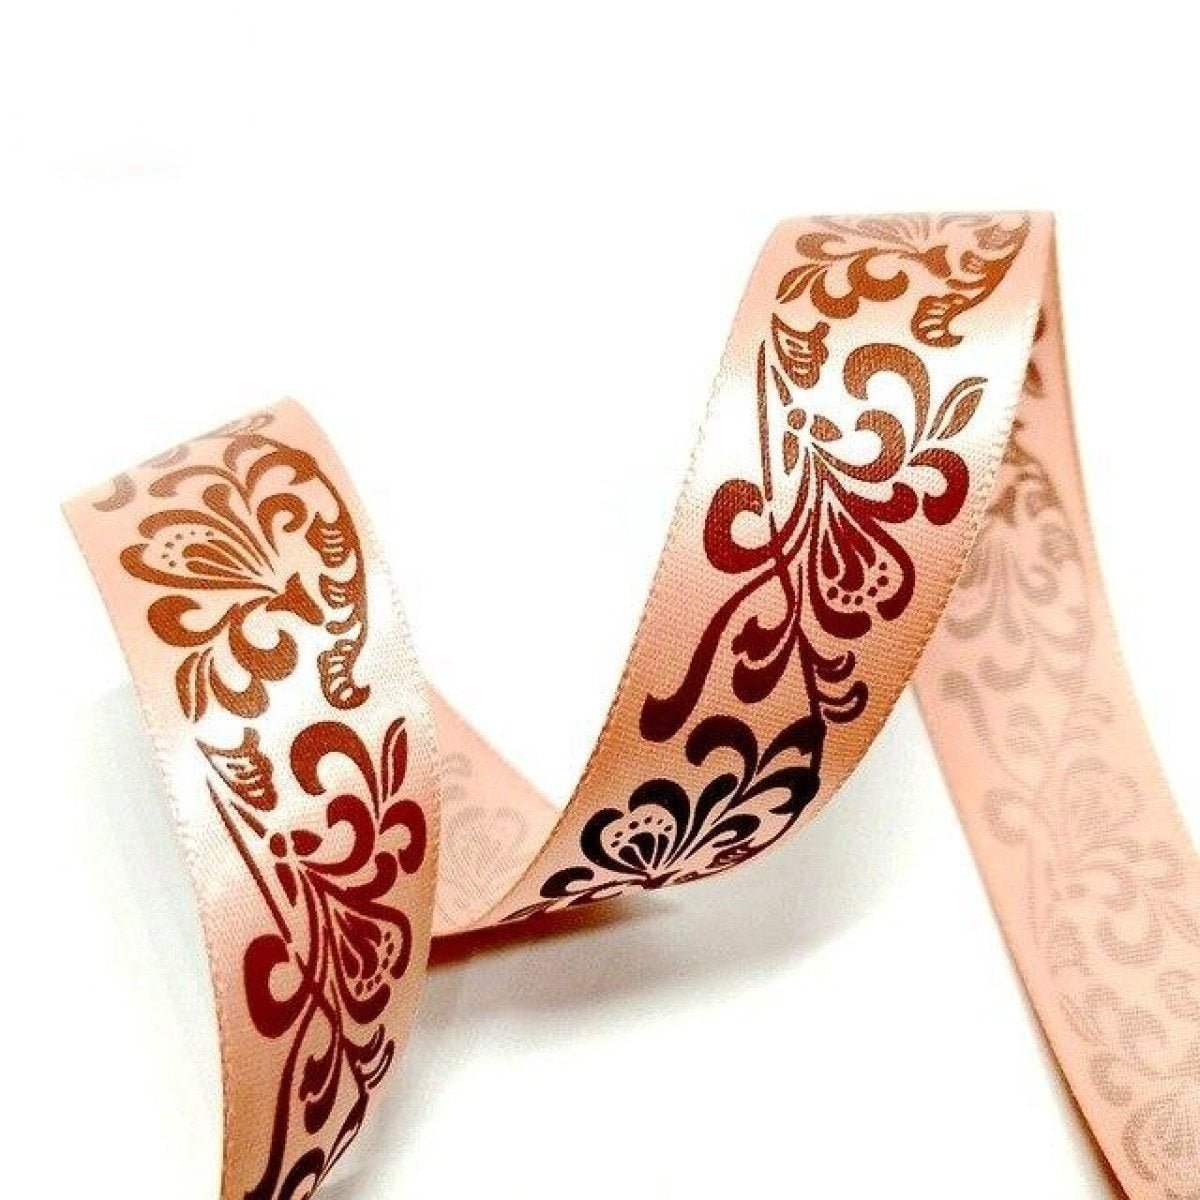 5M Polyester Ribbons 25Mm Diy Gift Wrapping Hair Accessories Sewing Bow Wedding Decorations